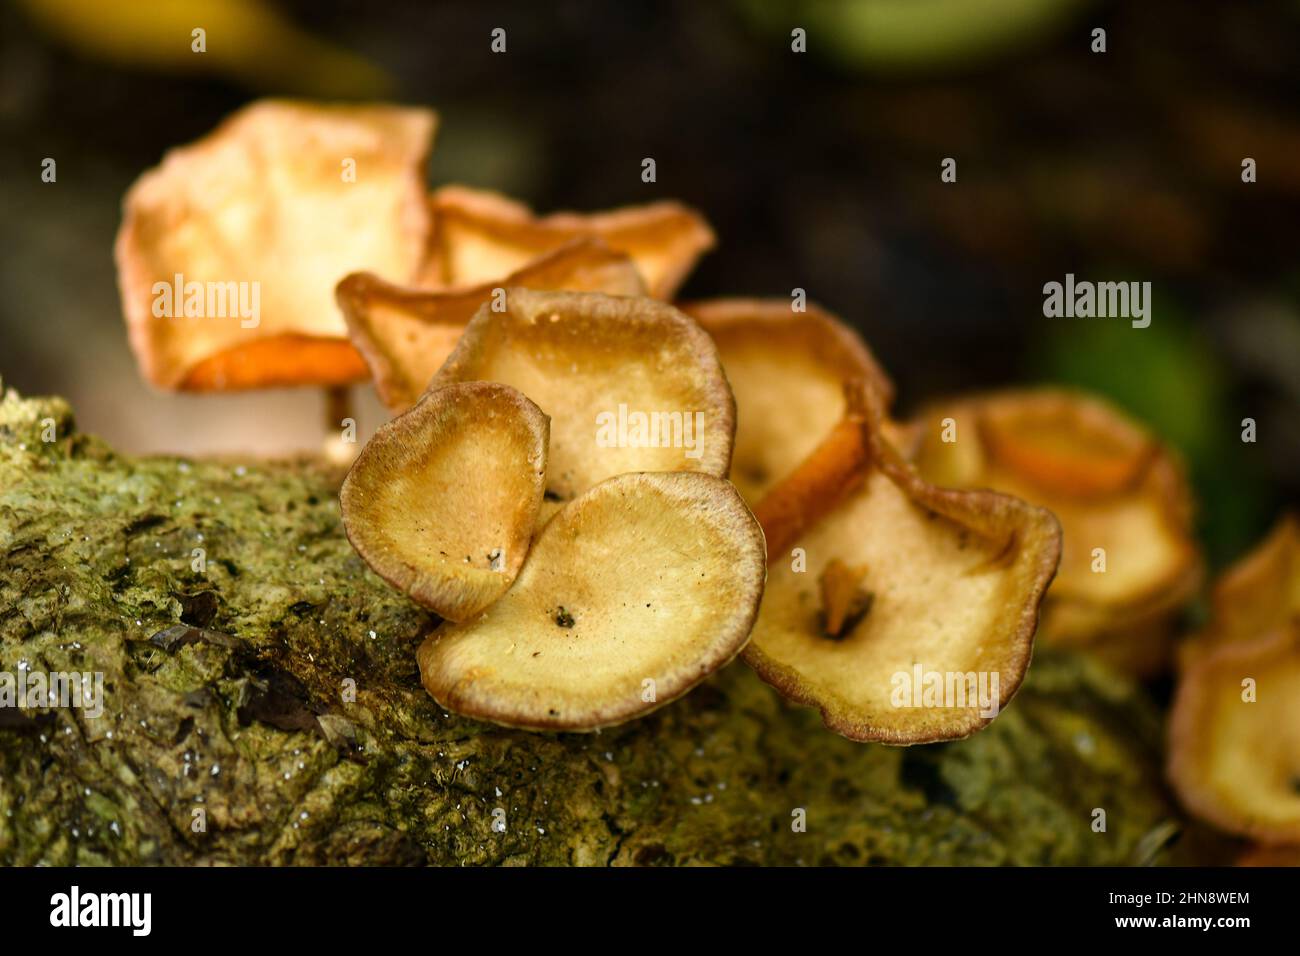 Brown fungus in Singapore rainforest Stock Photo